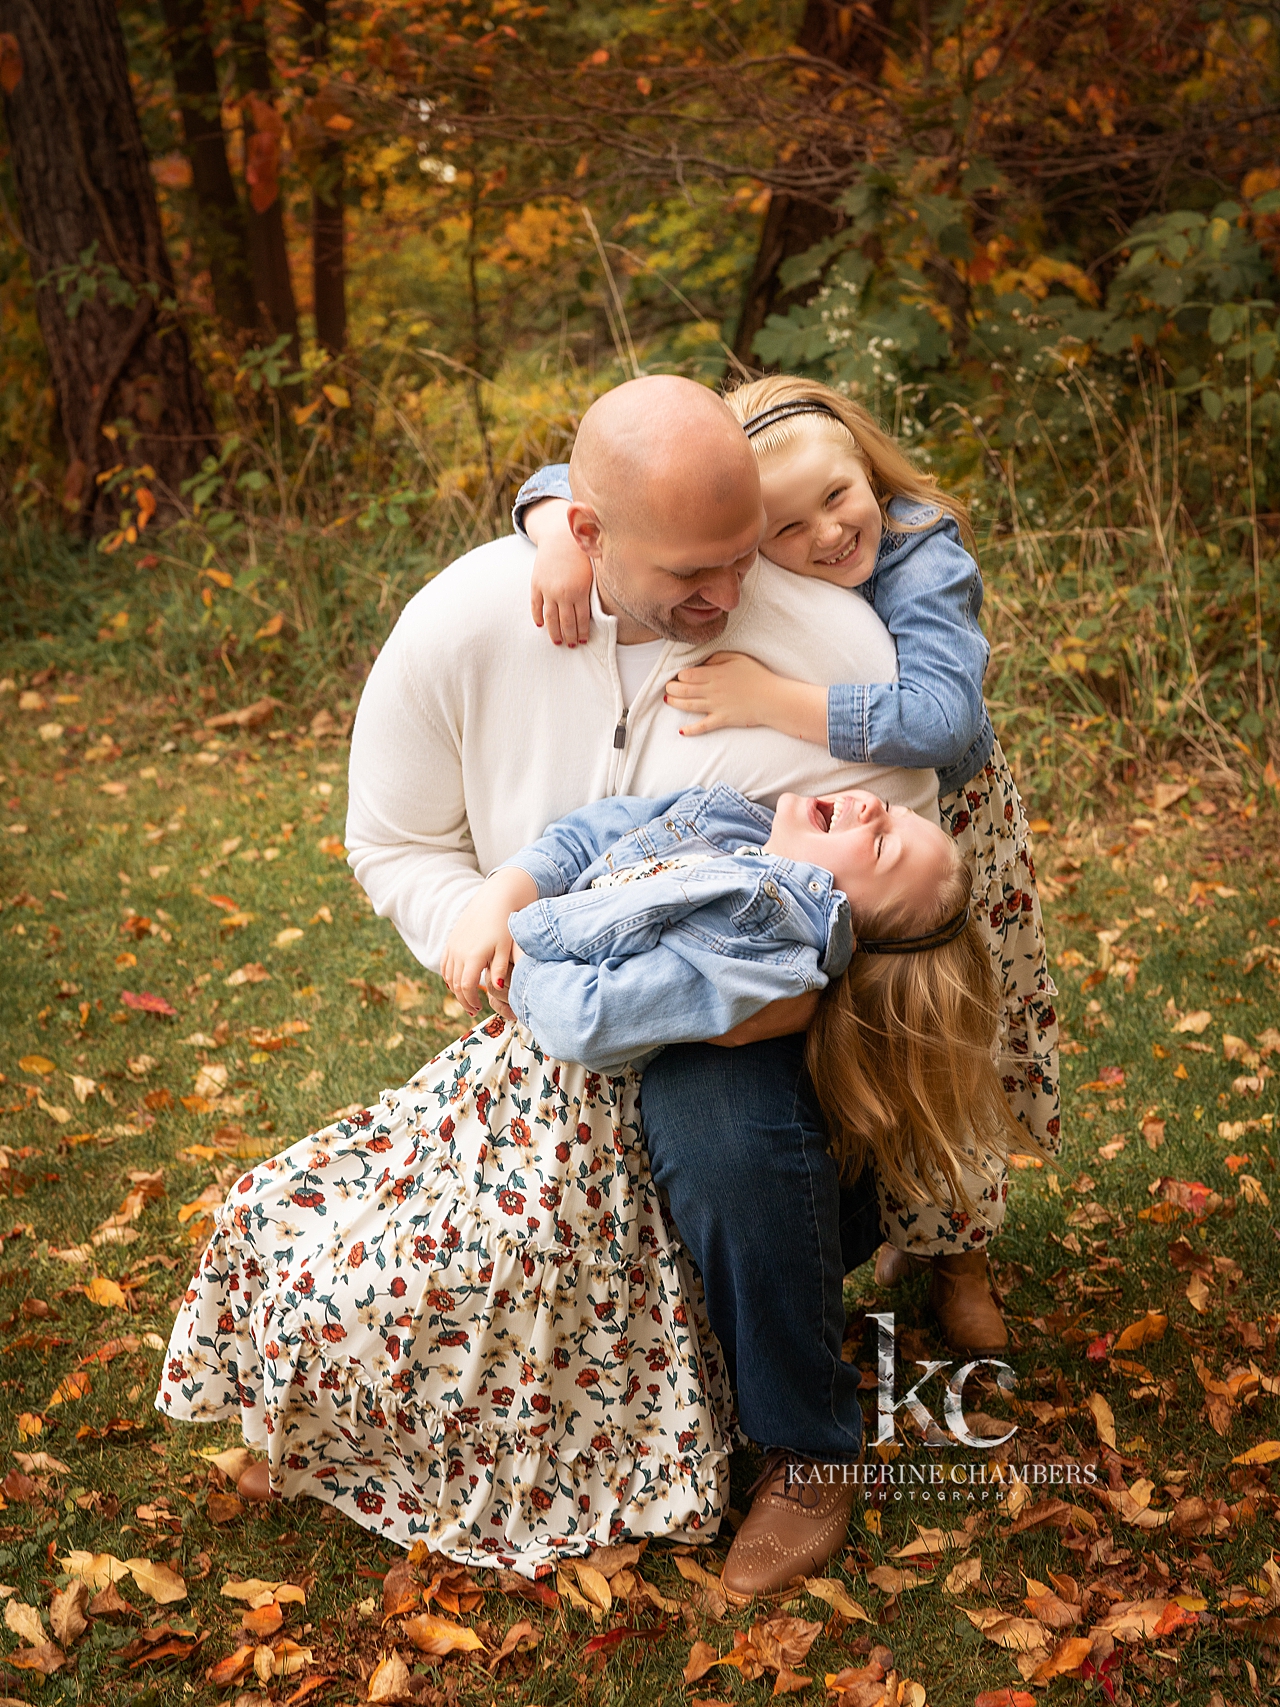 Dad with daughters photo shoot